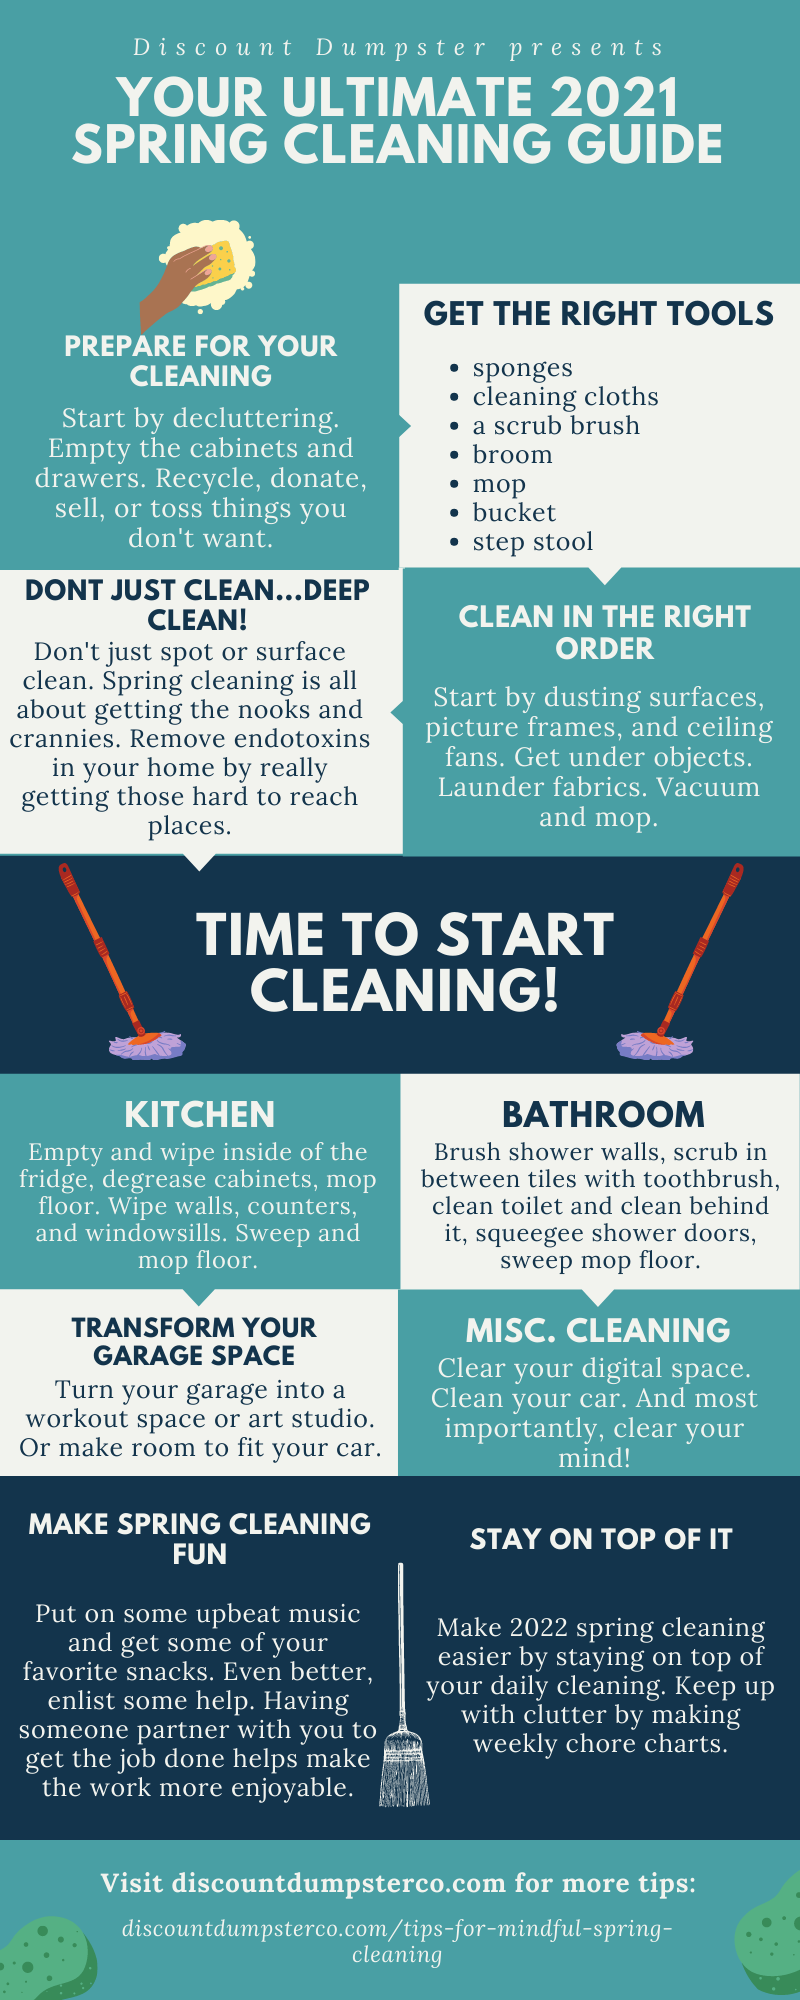 https://discountdumpsterco.com/wp-content/uploads/Your-Ultimate-2021-Spring-Cleaning-Guide-Infographic.png